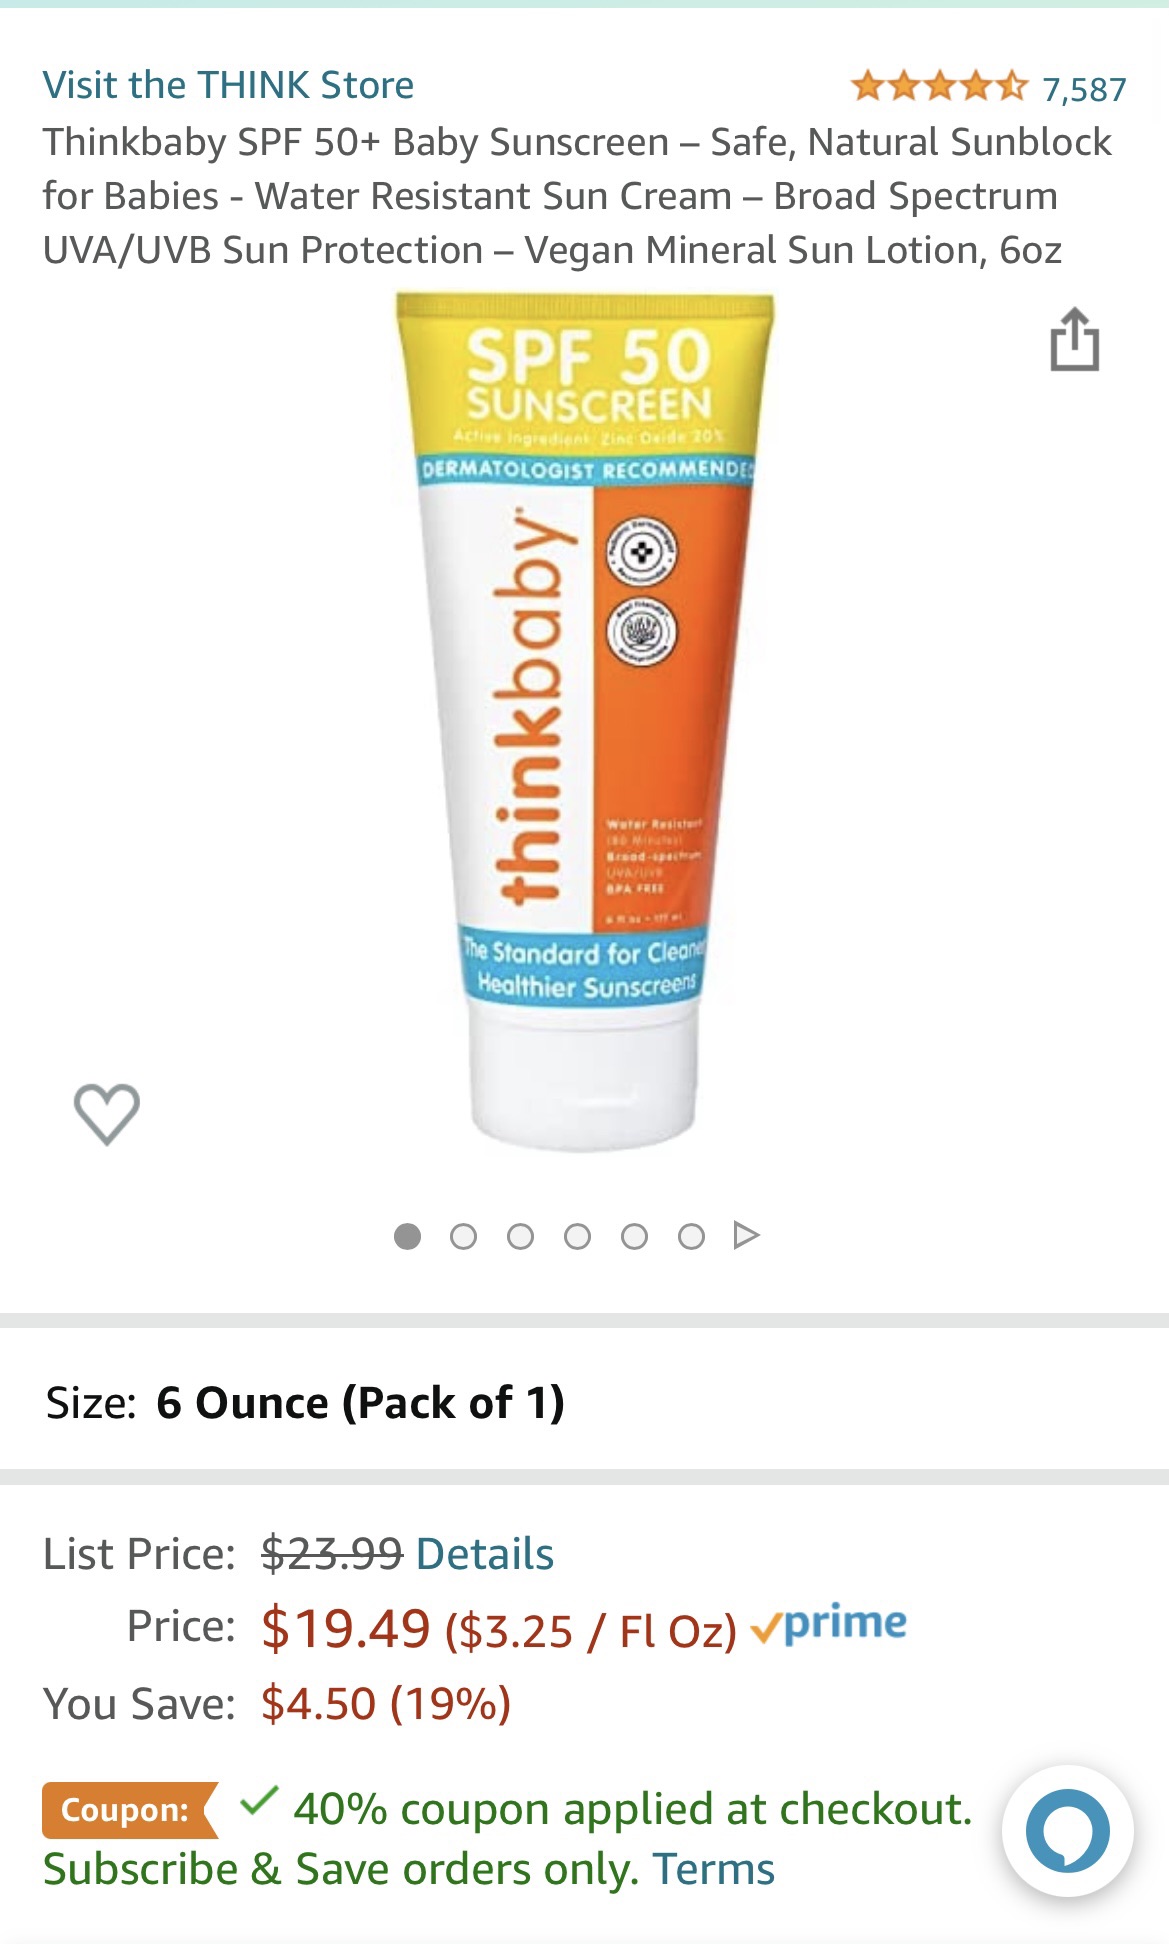 Amazon.com: Thinkbaby SPF 50+ Baby Sunscreen – Safe, Natural Sunblock for Babies - Water Resistant Sun Cream – Broad Spectrum UVA/UVB Sun Protection – Vegan Mineral Sun Lotion, 6oz : Baby